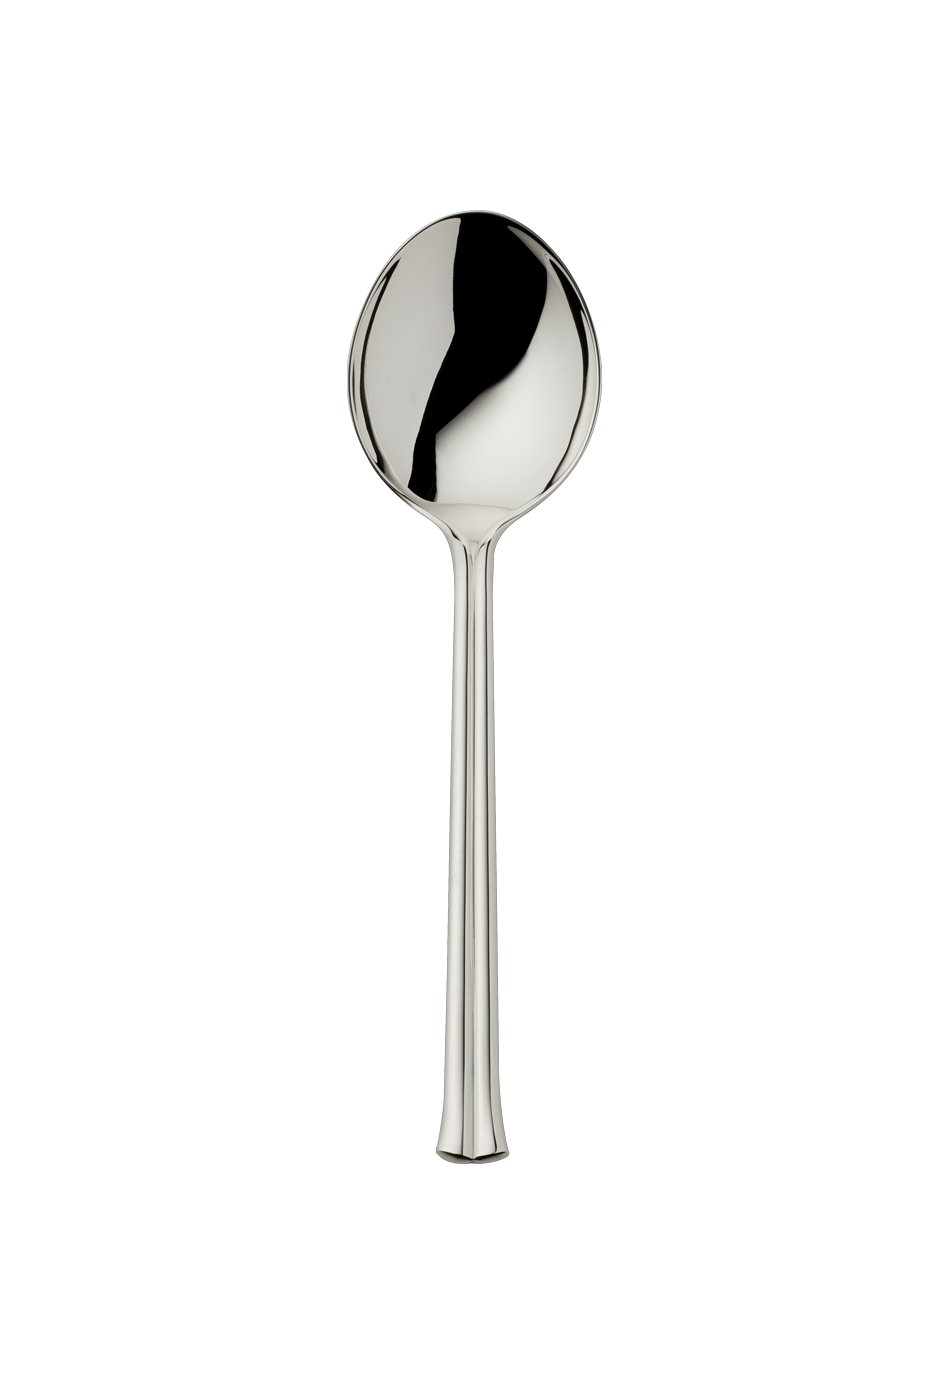 Viva Compote/Salad Serving Spoon, large (150g massive silverplated)